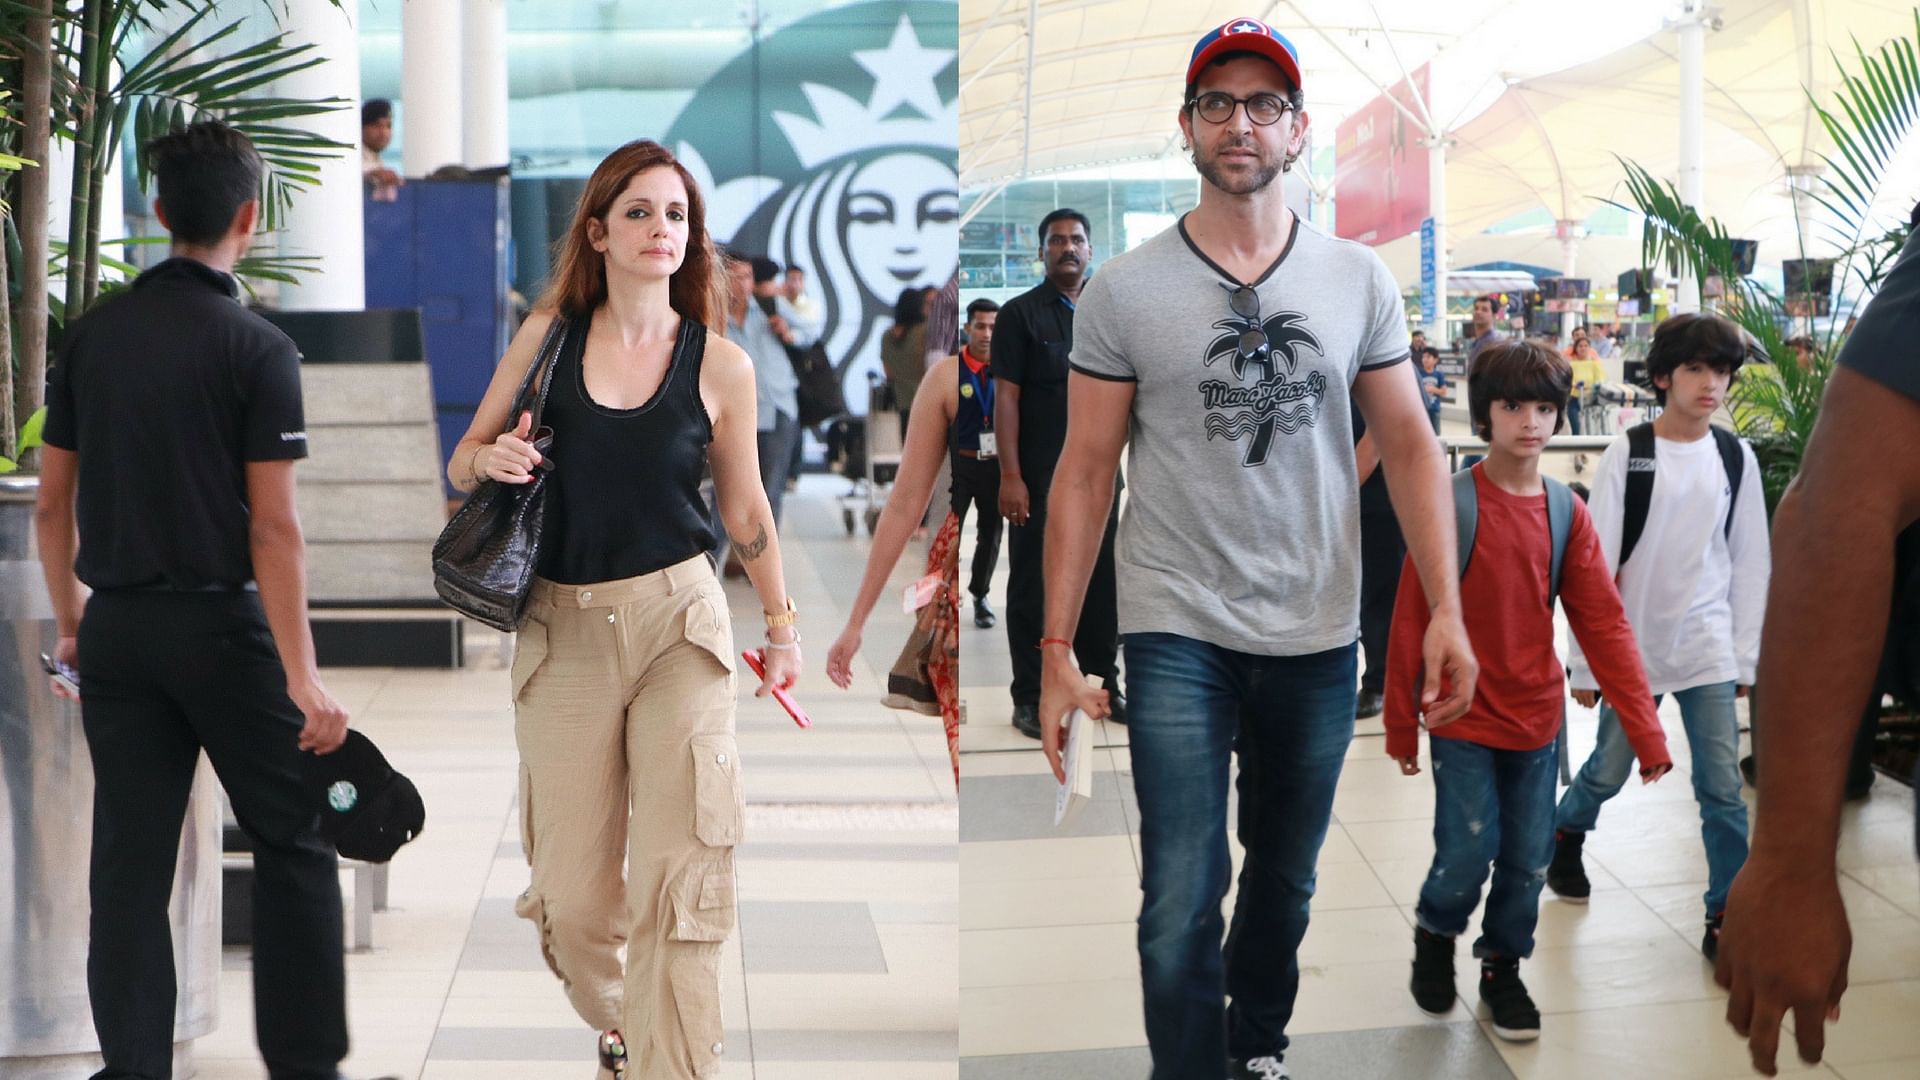 Sussanne Khan and Hrithik Roshan with their kids Hridhaan and Hrehaan at the Mumbai airport.